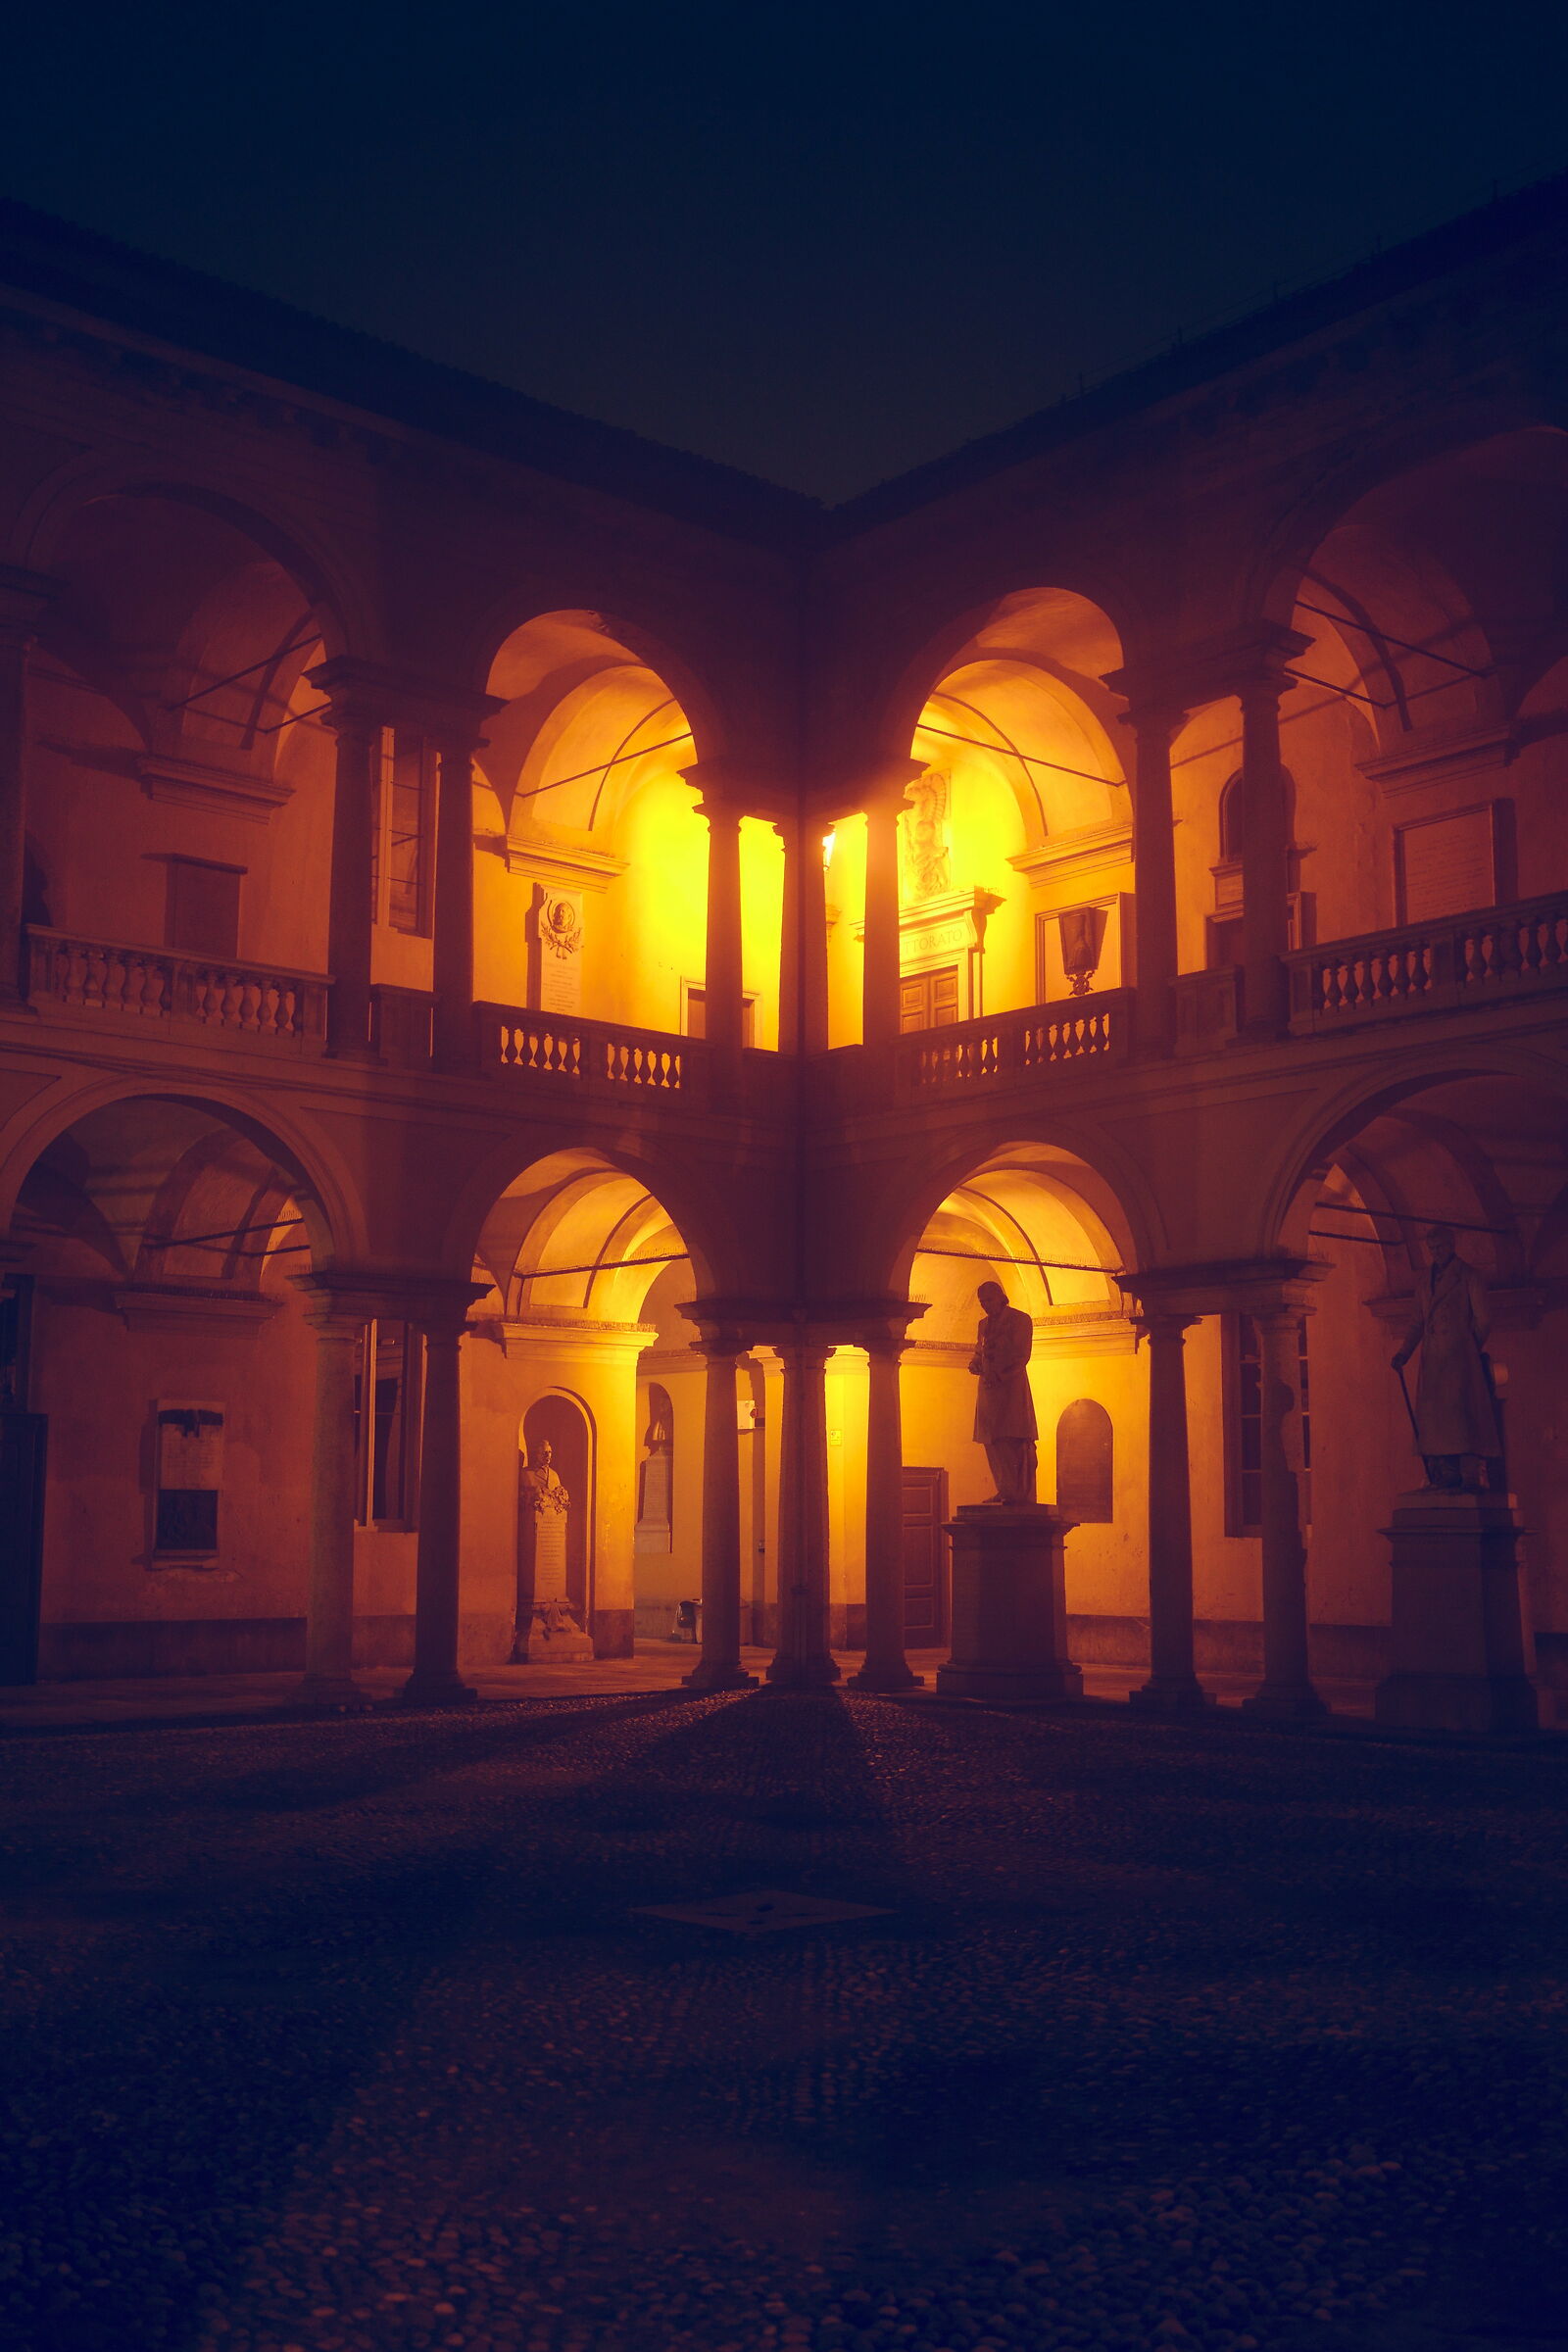 Courtyard of the Statues, University of Pavia 1B...